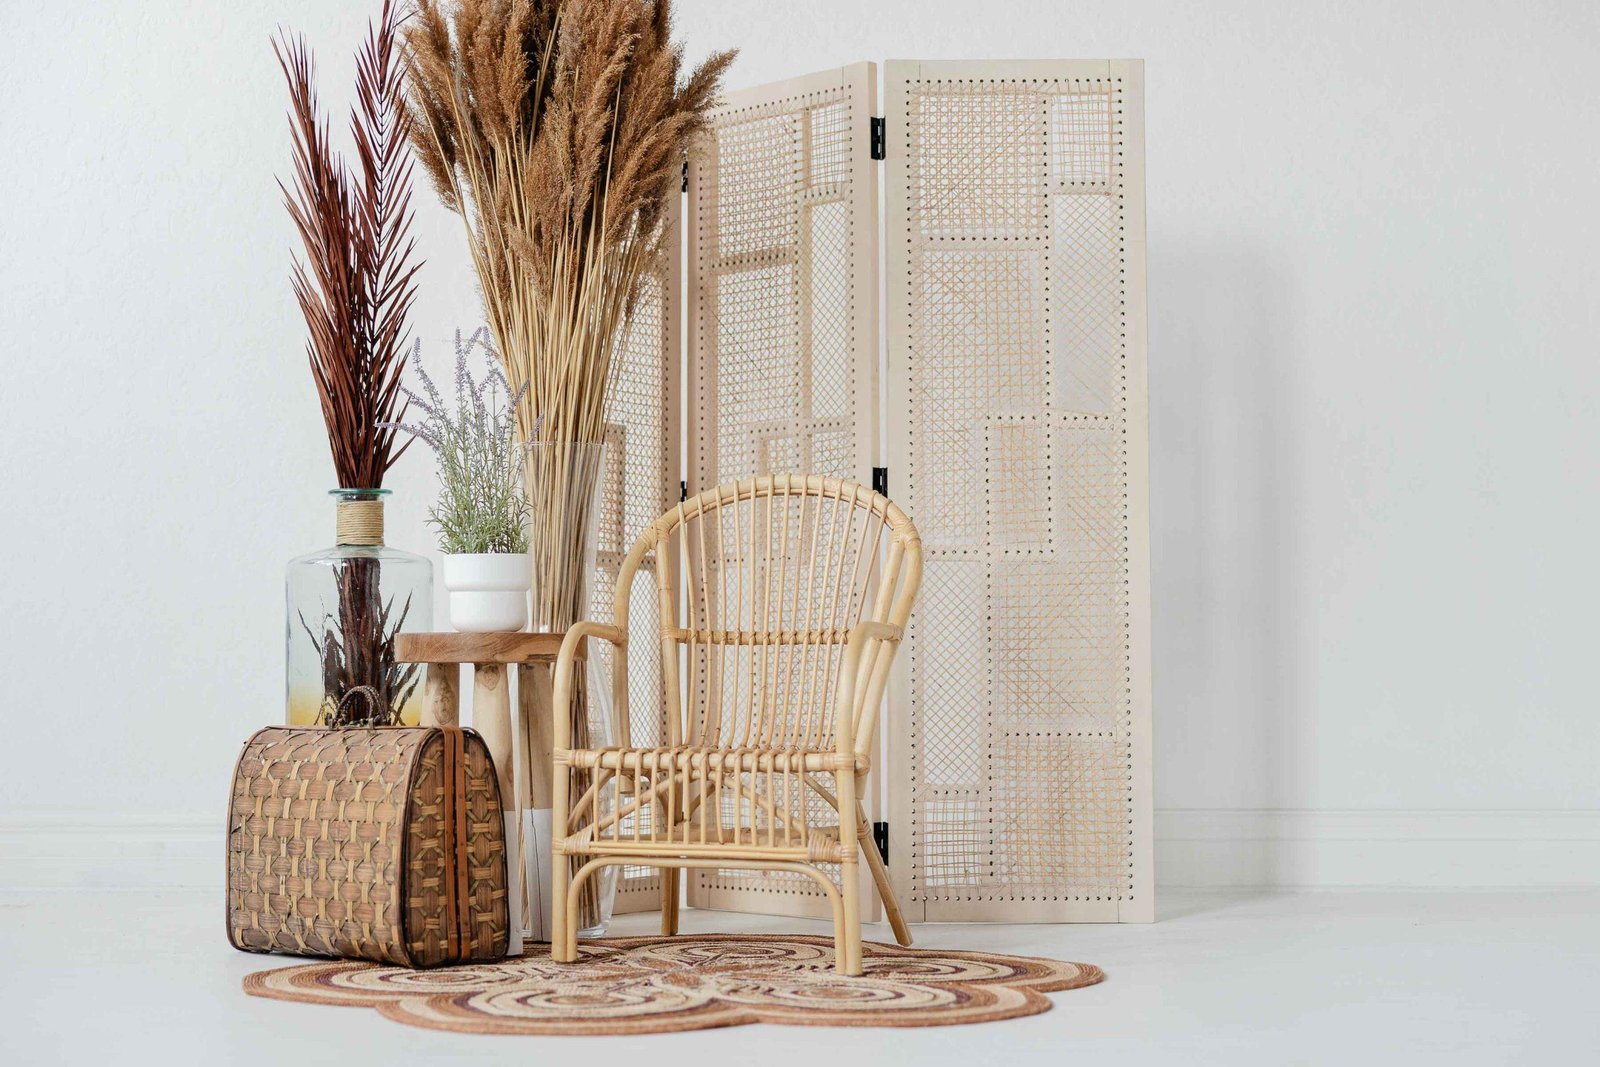 photography setup of chair, rugs, briefcase, and pampas grass